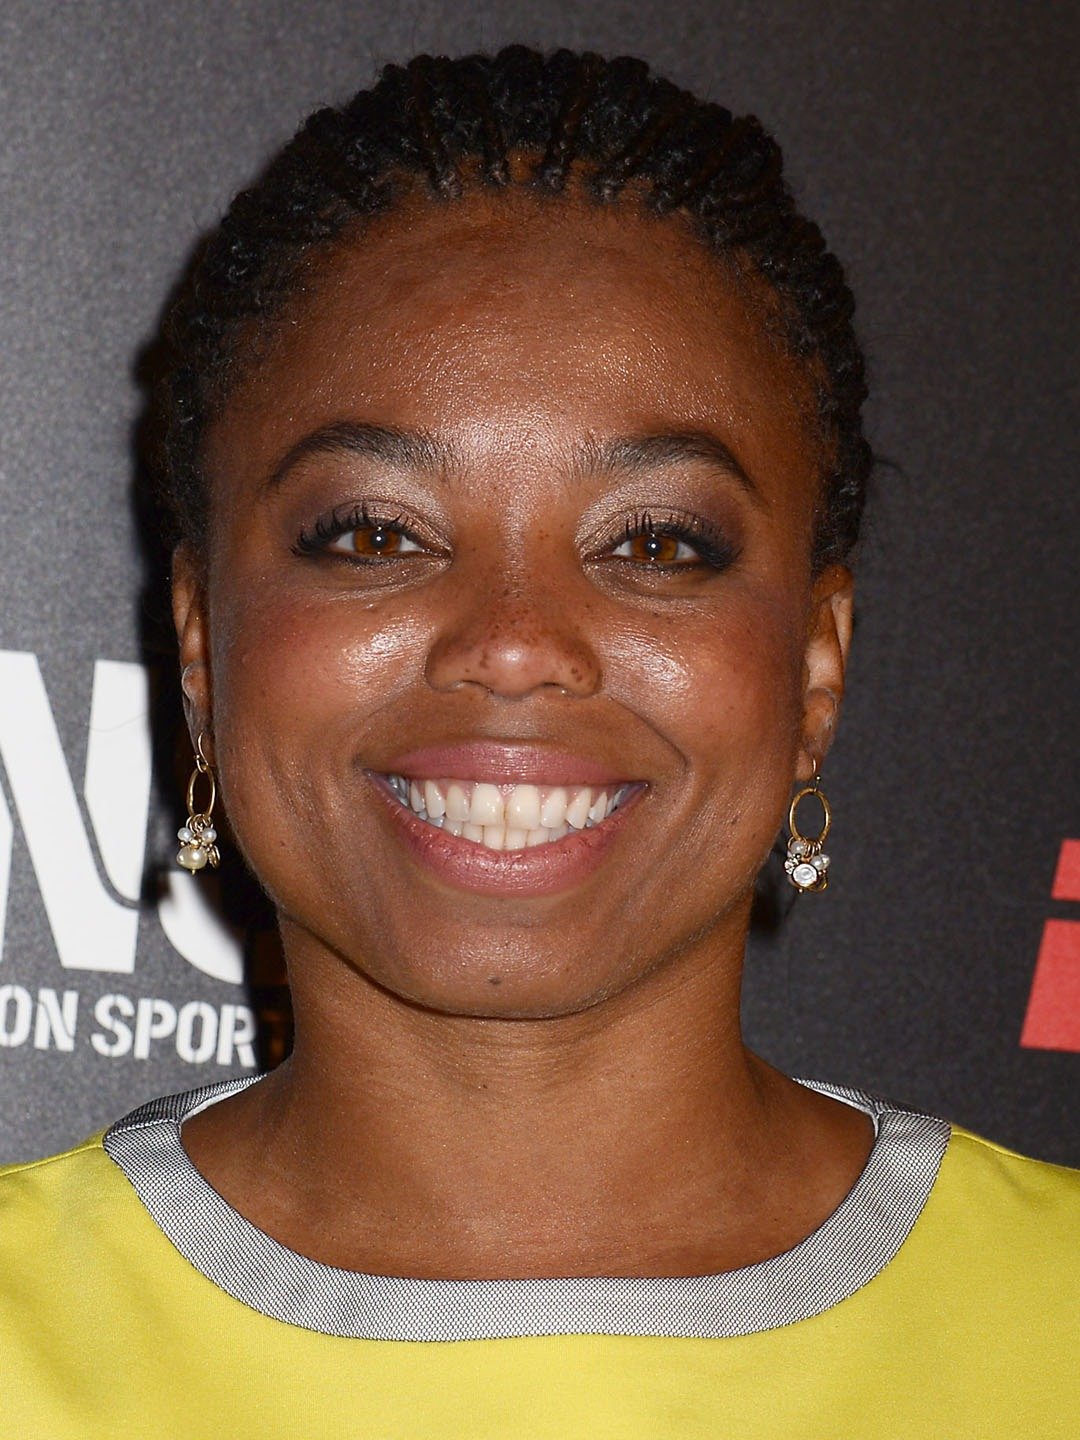 How tall is Jemele Hill?